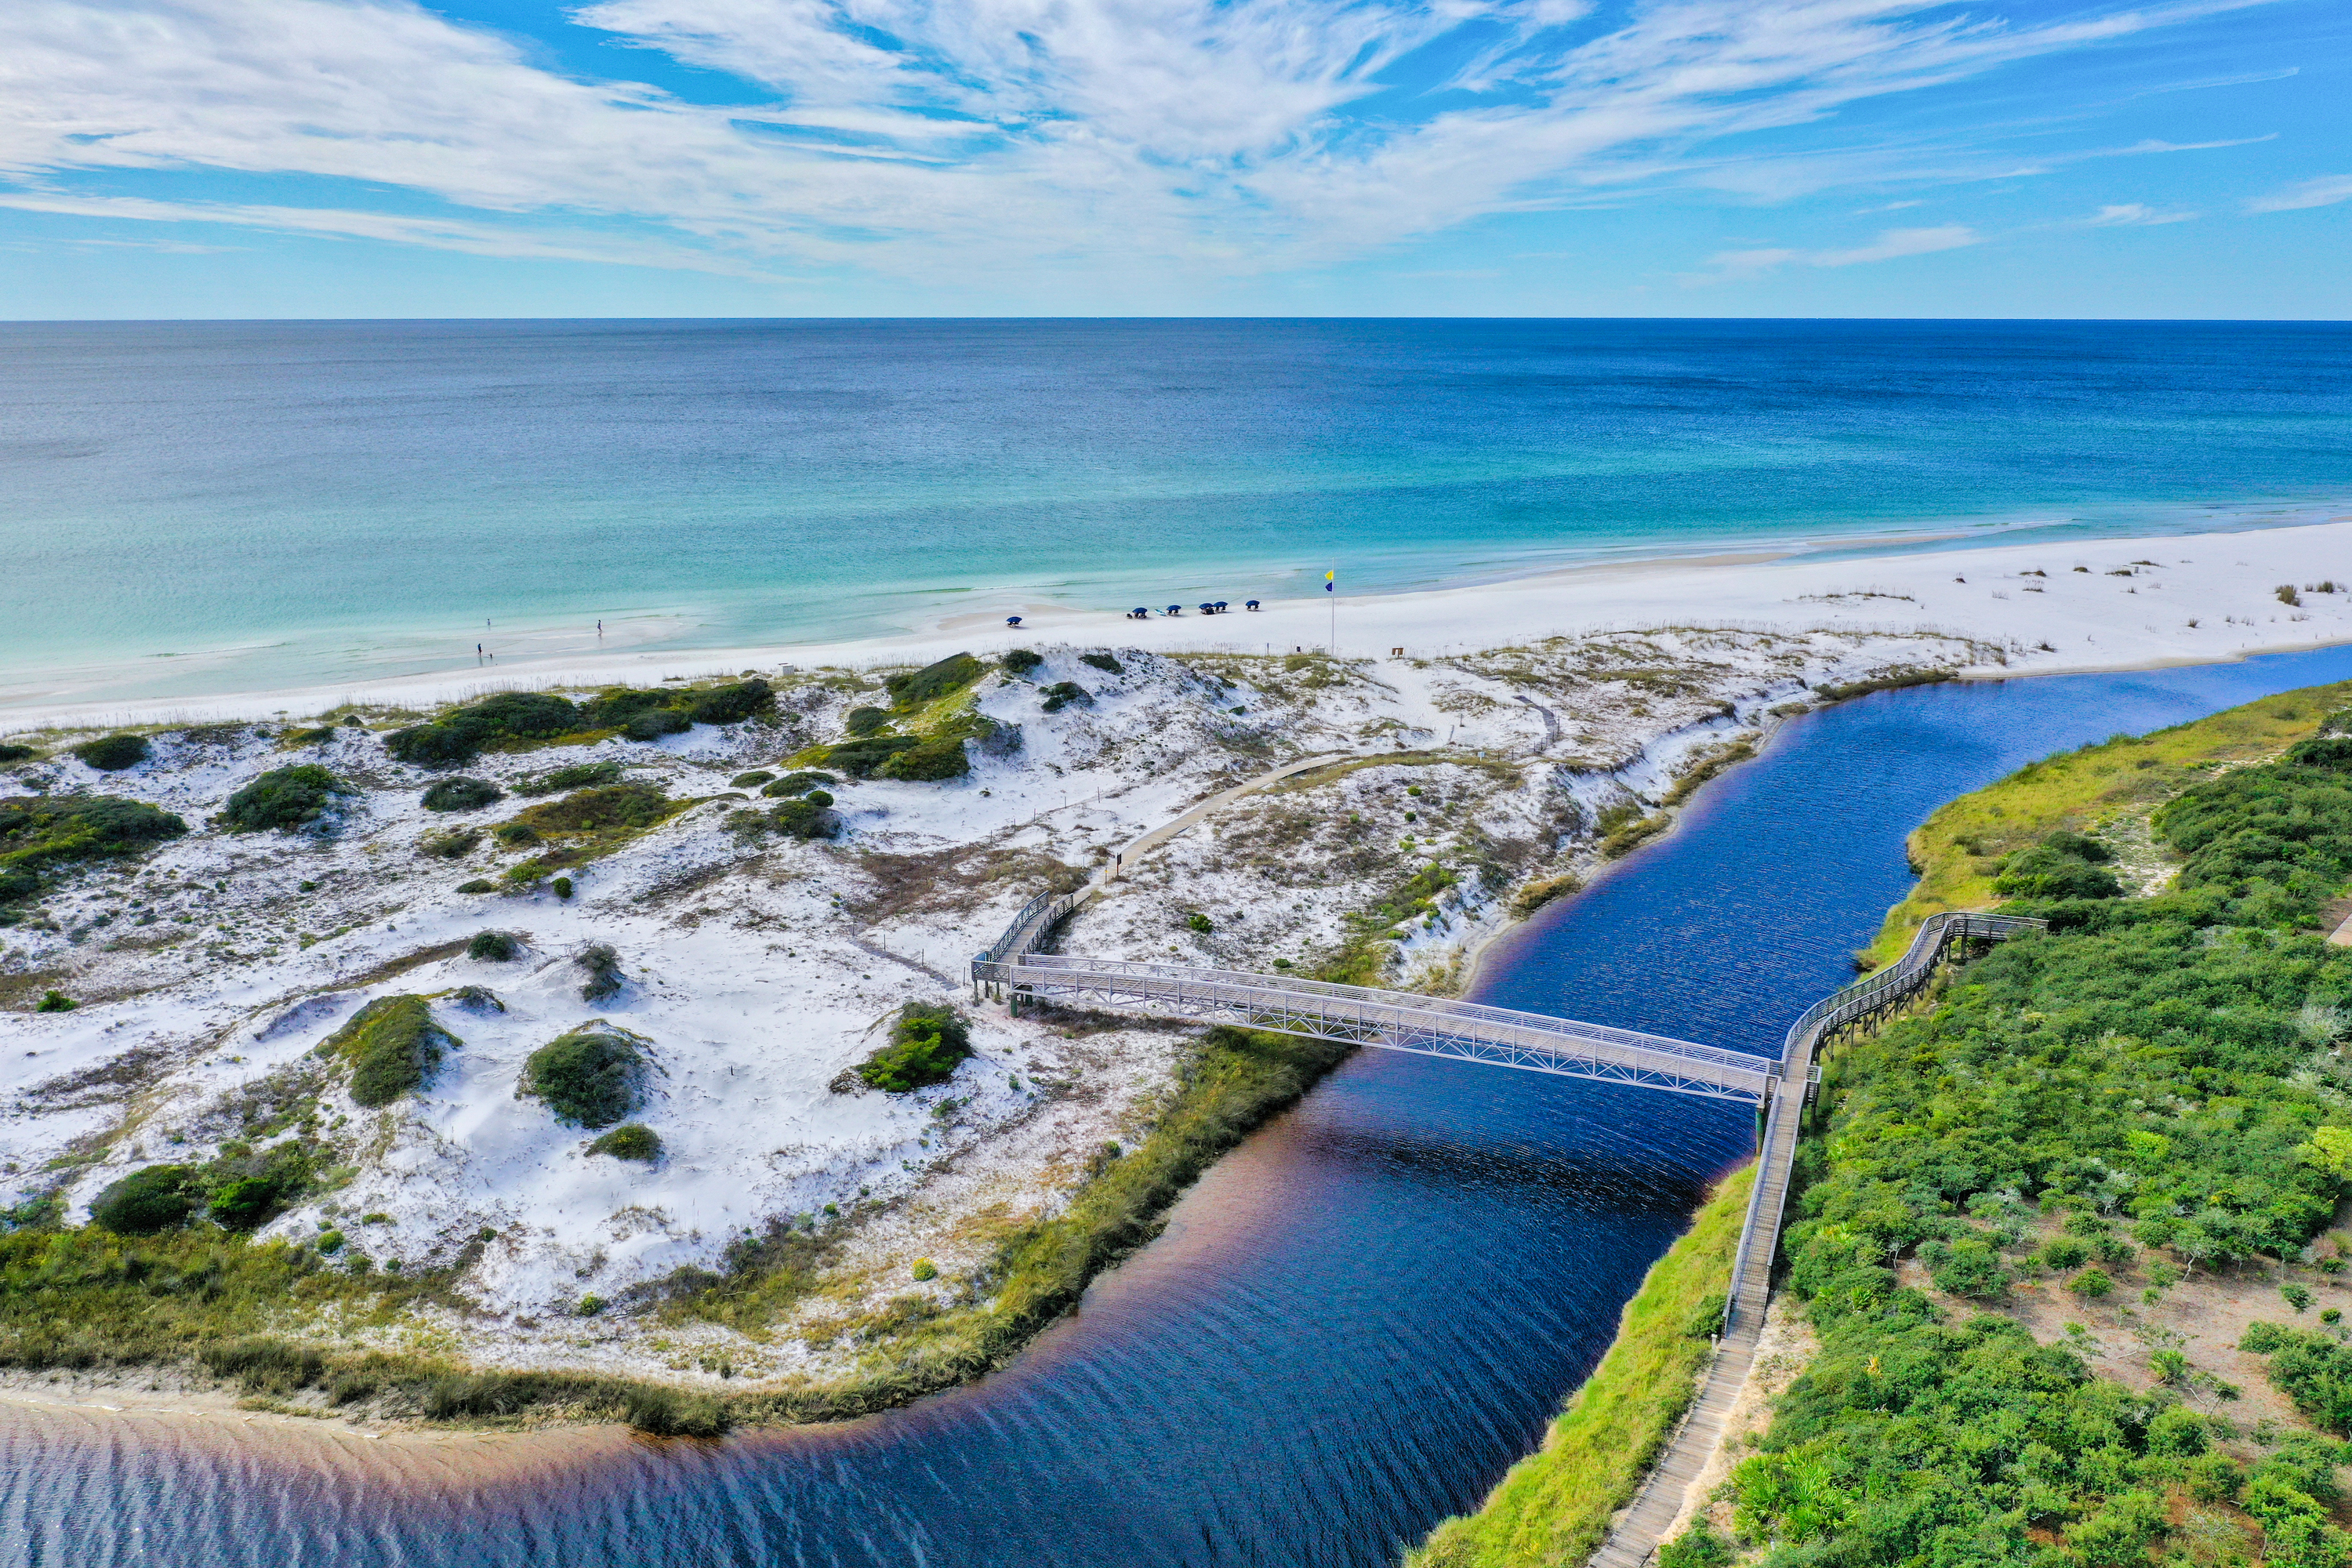 Pristine beach with partial native vegetation coverage along the brilliant blue gulf water with a foot bridge over a dune lake outfall onto the beach